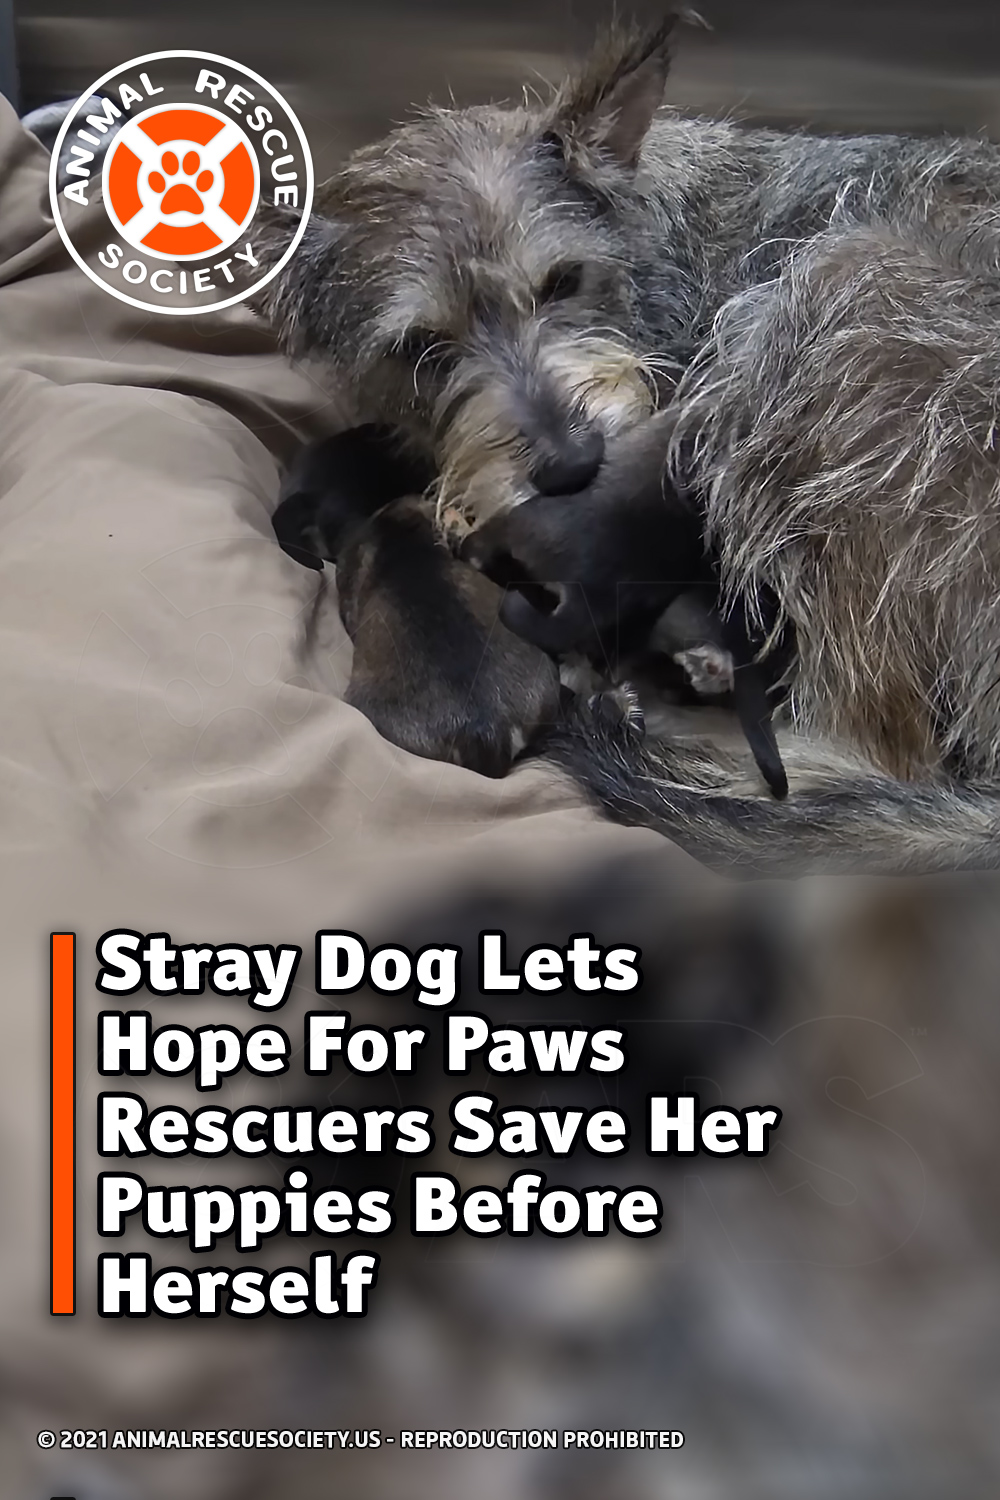 Stray Dog Lets Hope For Paws Rescuers Save Her Puppies Before Herself